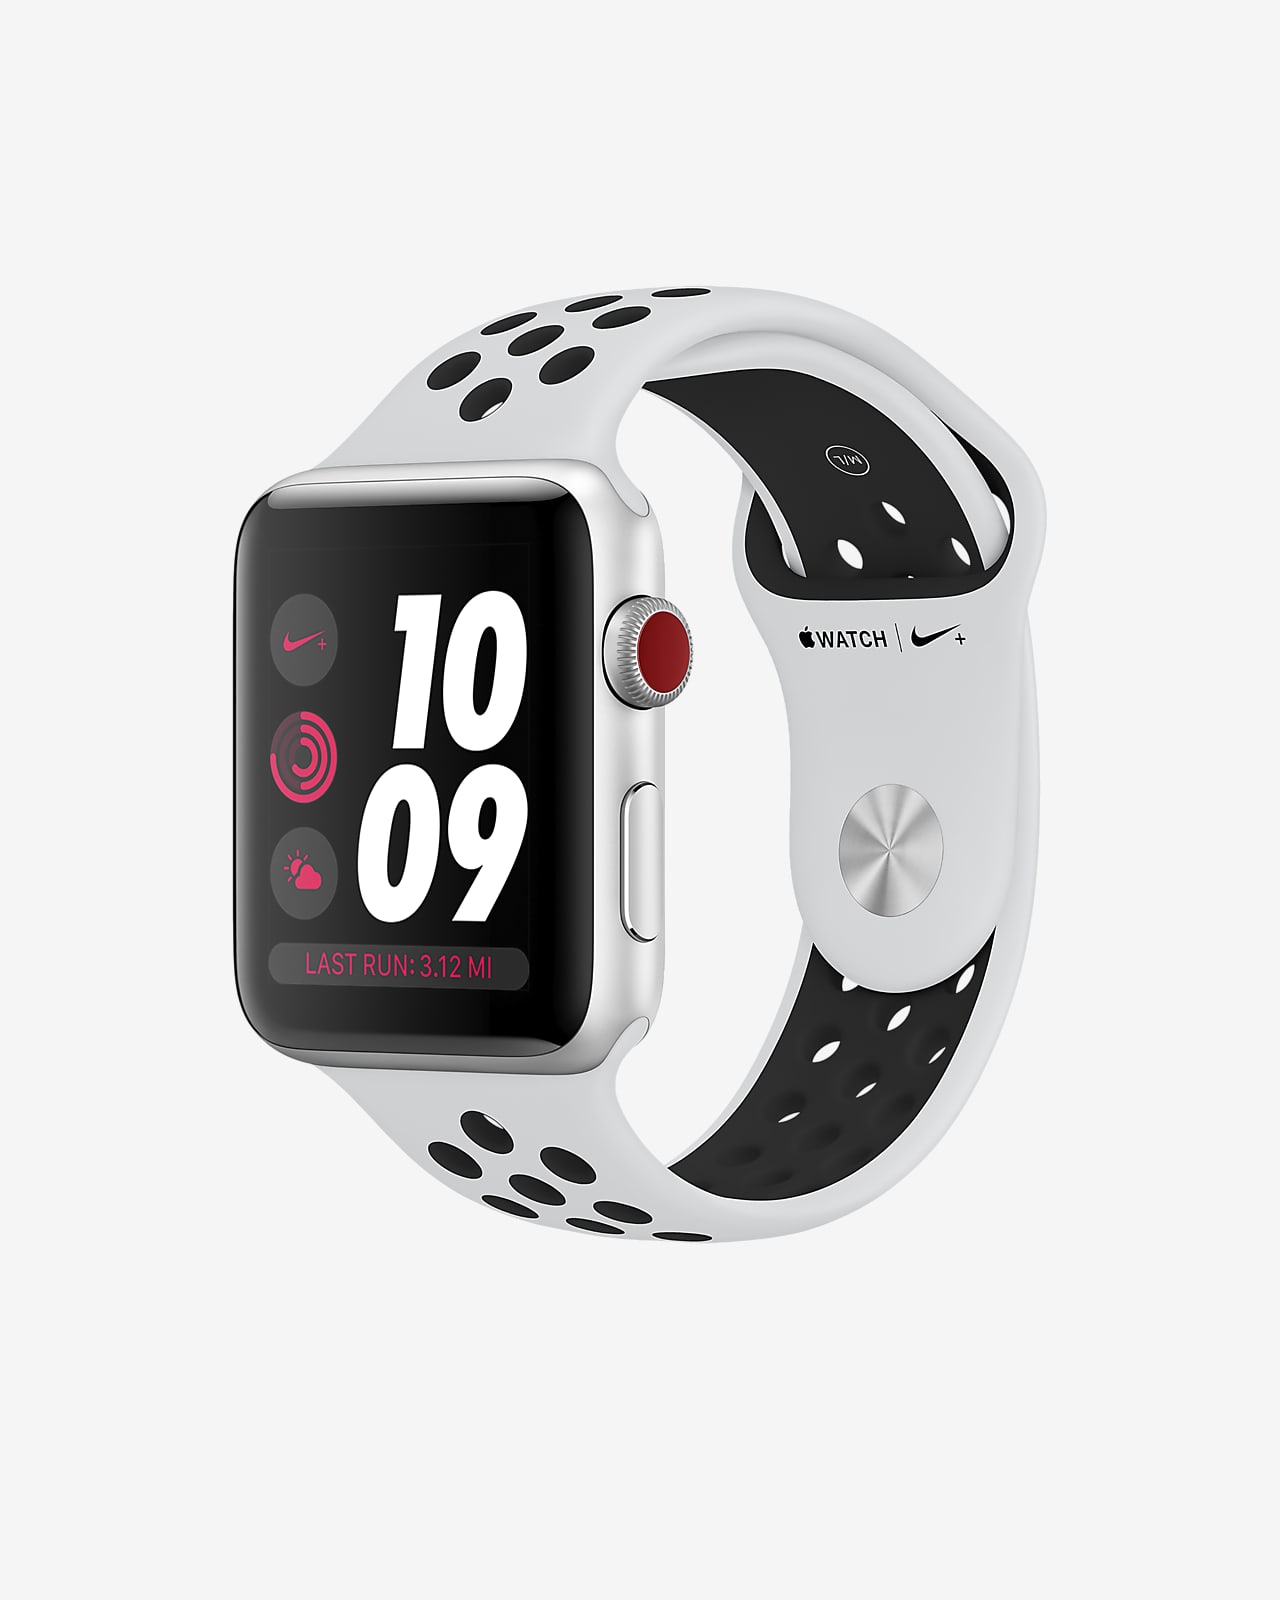 May Happening capital Apple Watch Nike+ Series 3 (GPS + Cellular) 42mm Open Box Running Watch.  Nike.com